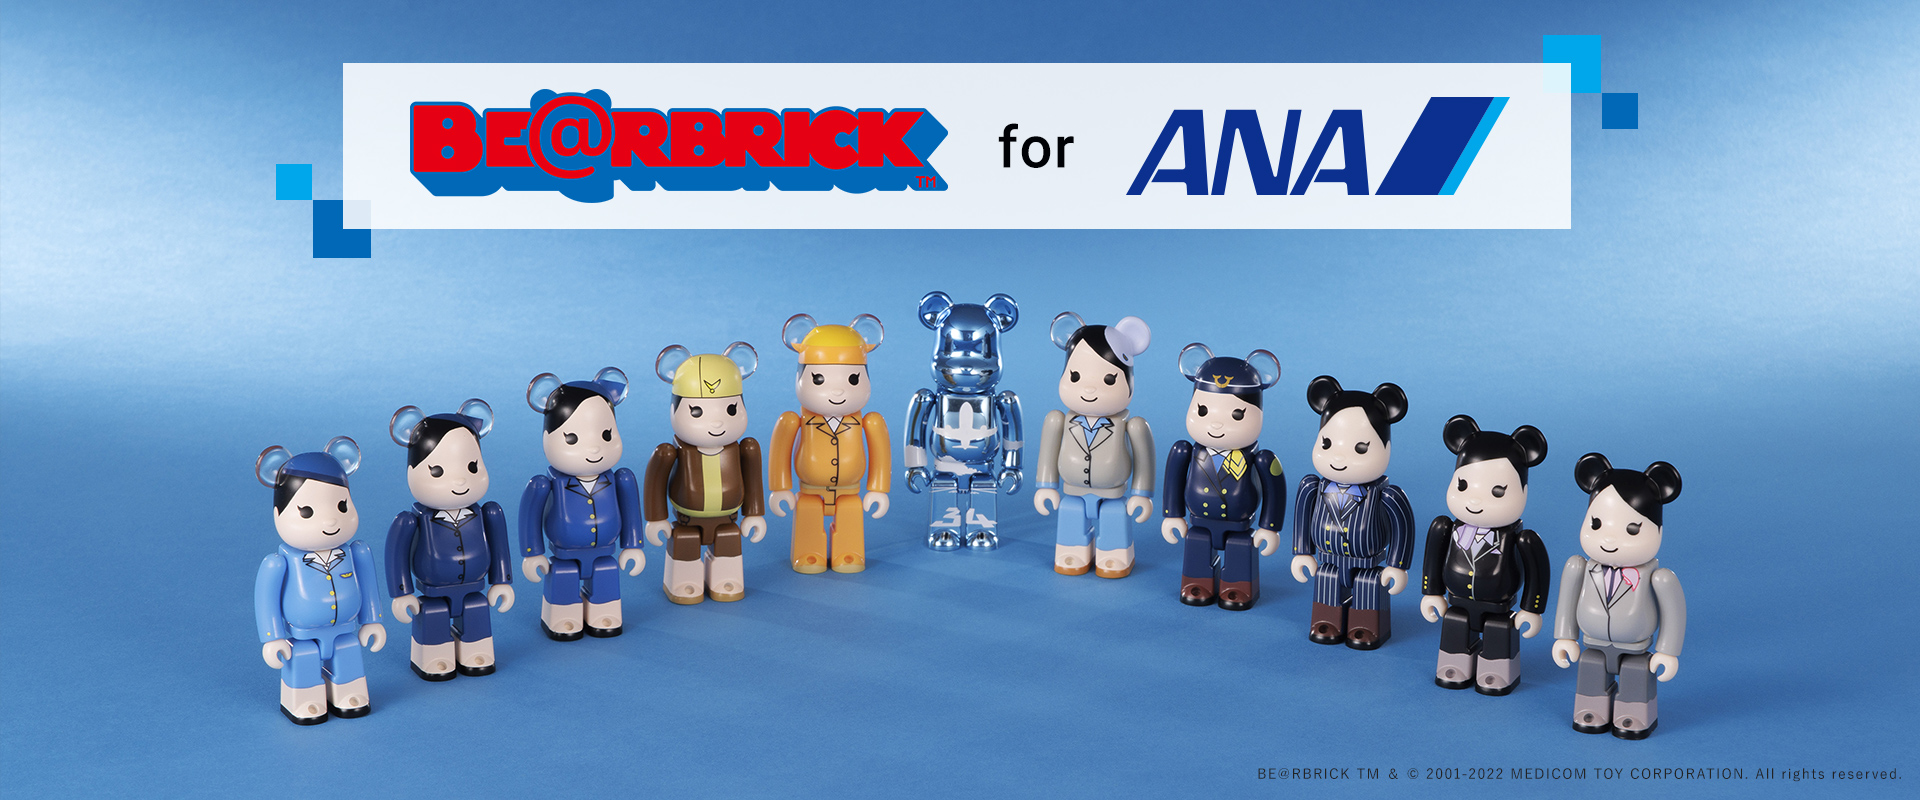 BE@RBRICK for ANA BE＠RBRICK TM ＆ © 2001-2022 MEDICOM TOY CORPORATION. All rights reserved.